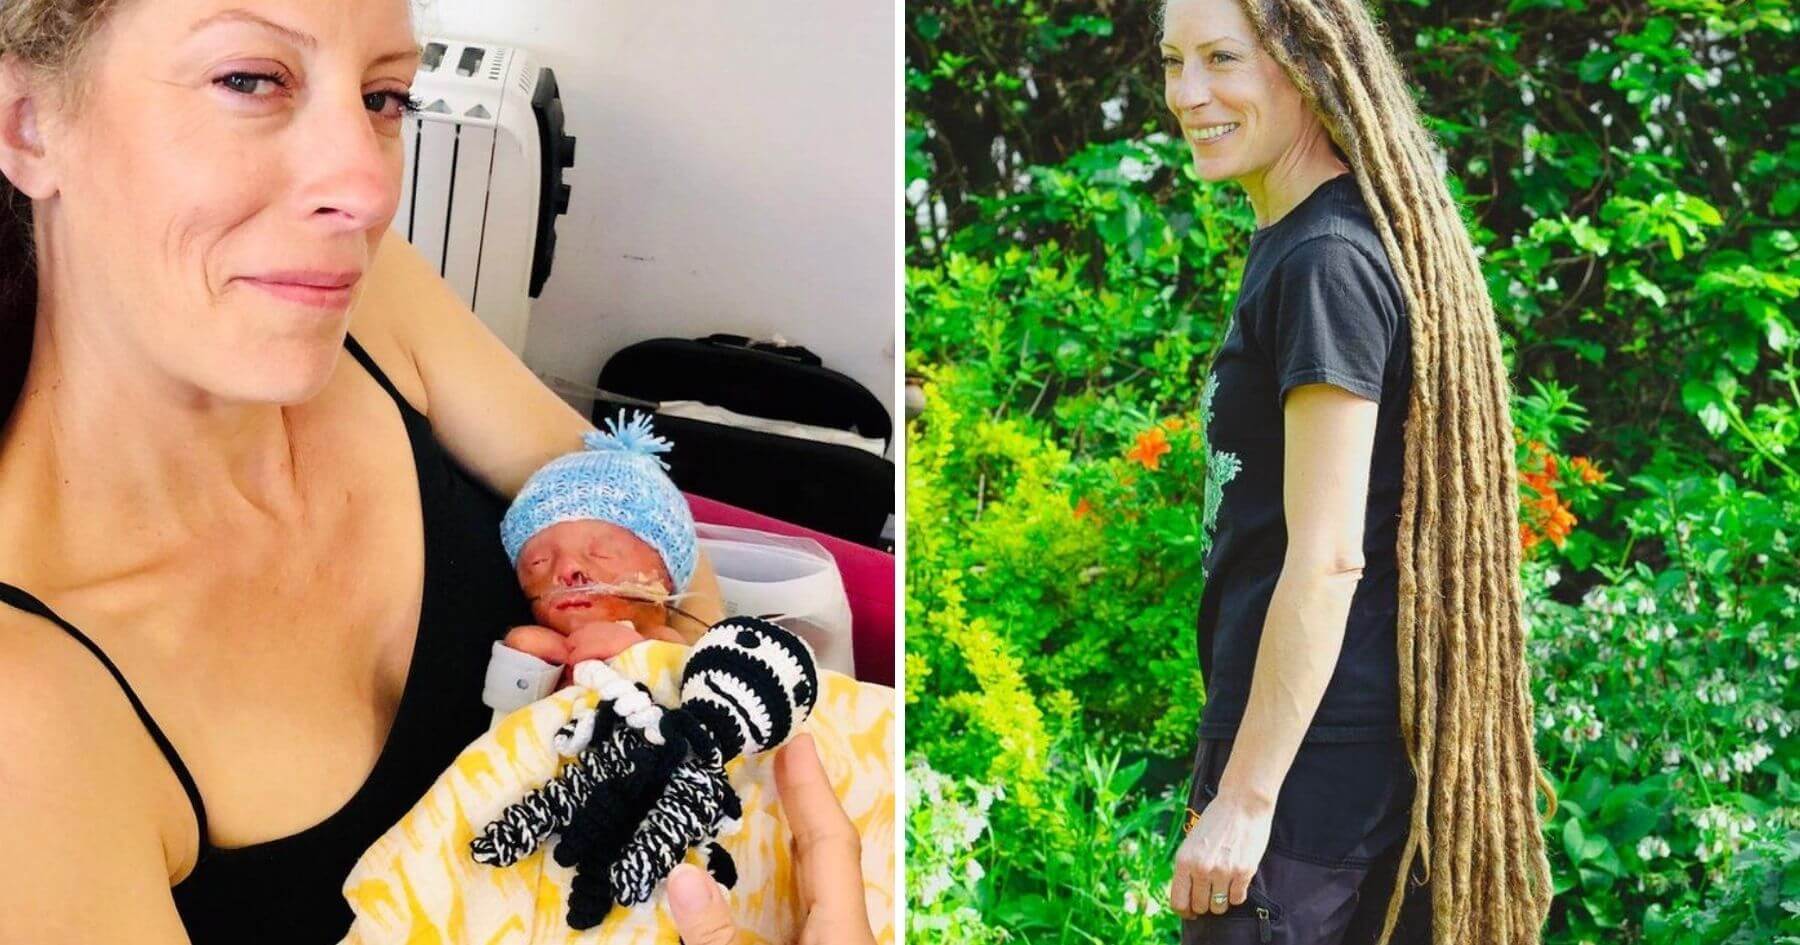 Woman chops off dreadlocks to raise money for hospice who helped after the death of their two-day-old baby